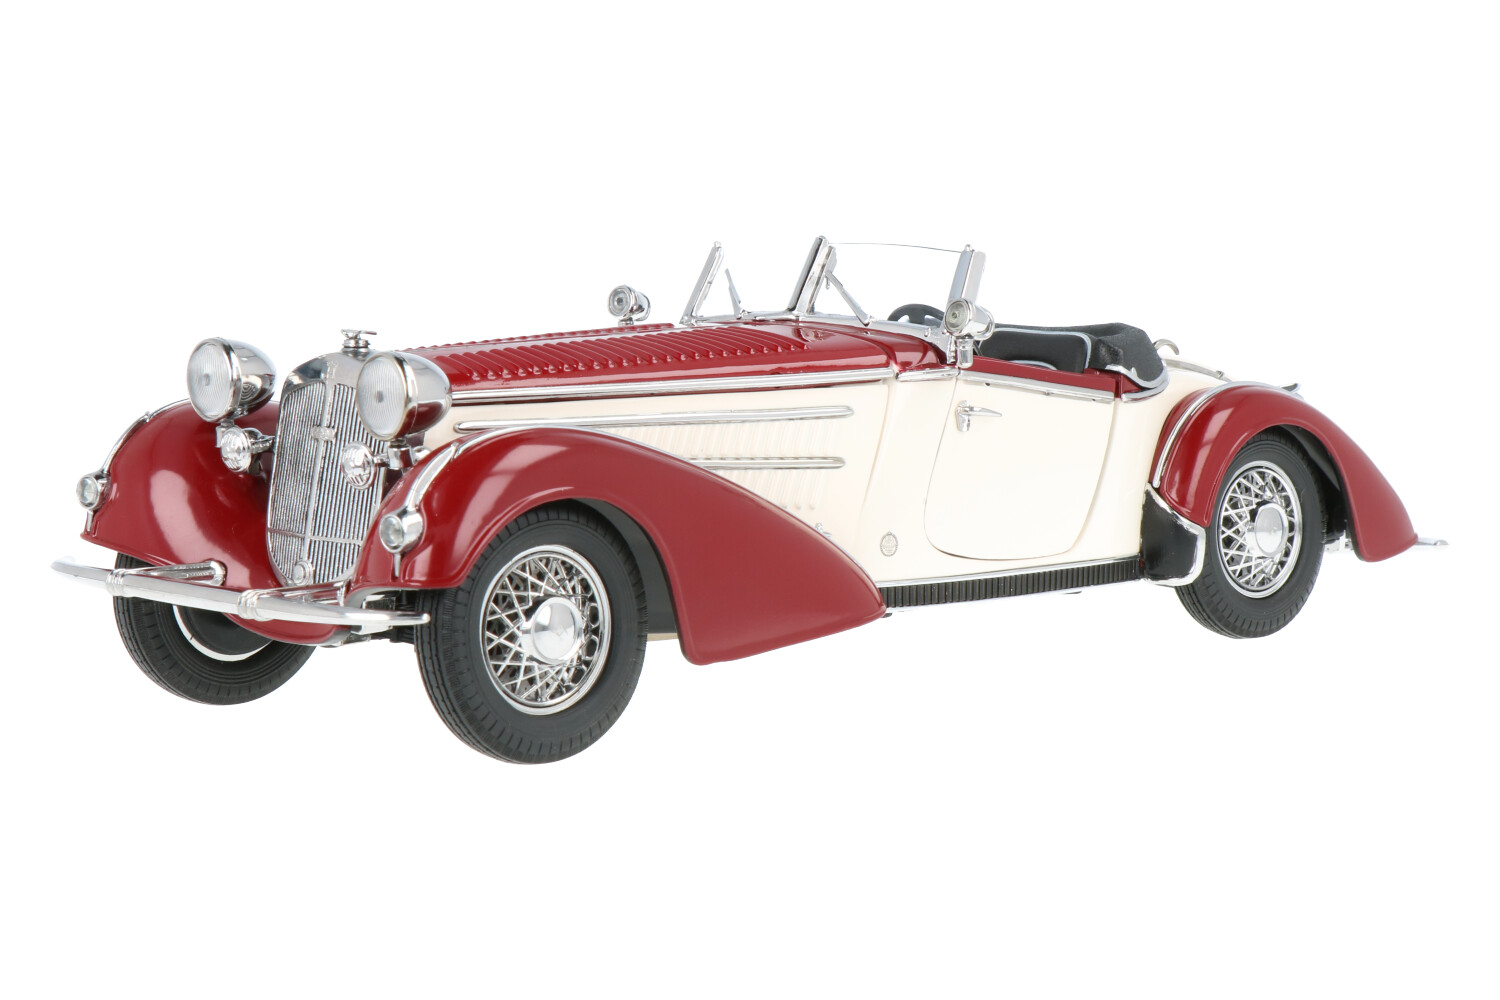 Horch-855-Roadster-2406_1315657440024068Horch-855-Roadster-2406_Houseofmodelcars_.jpg